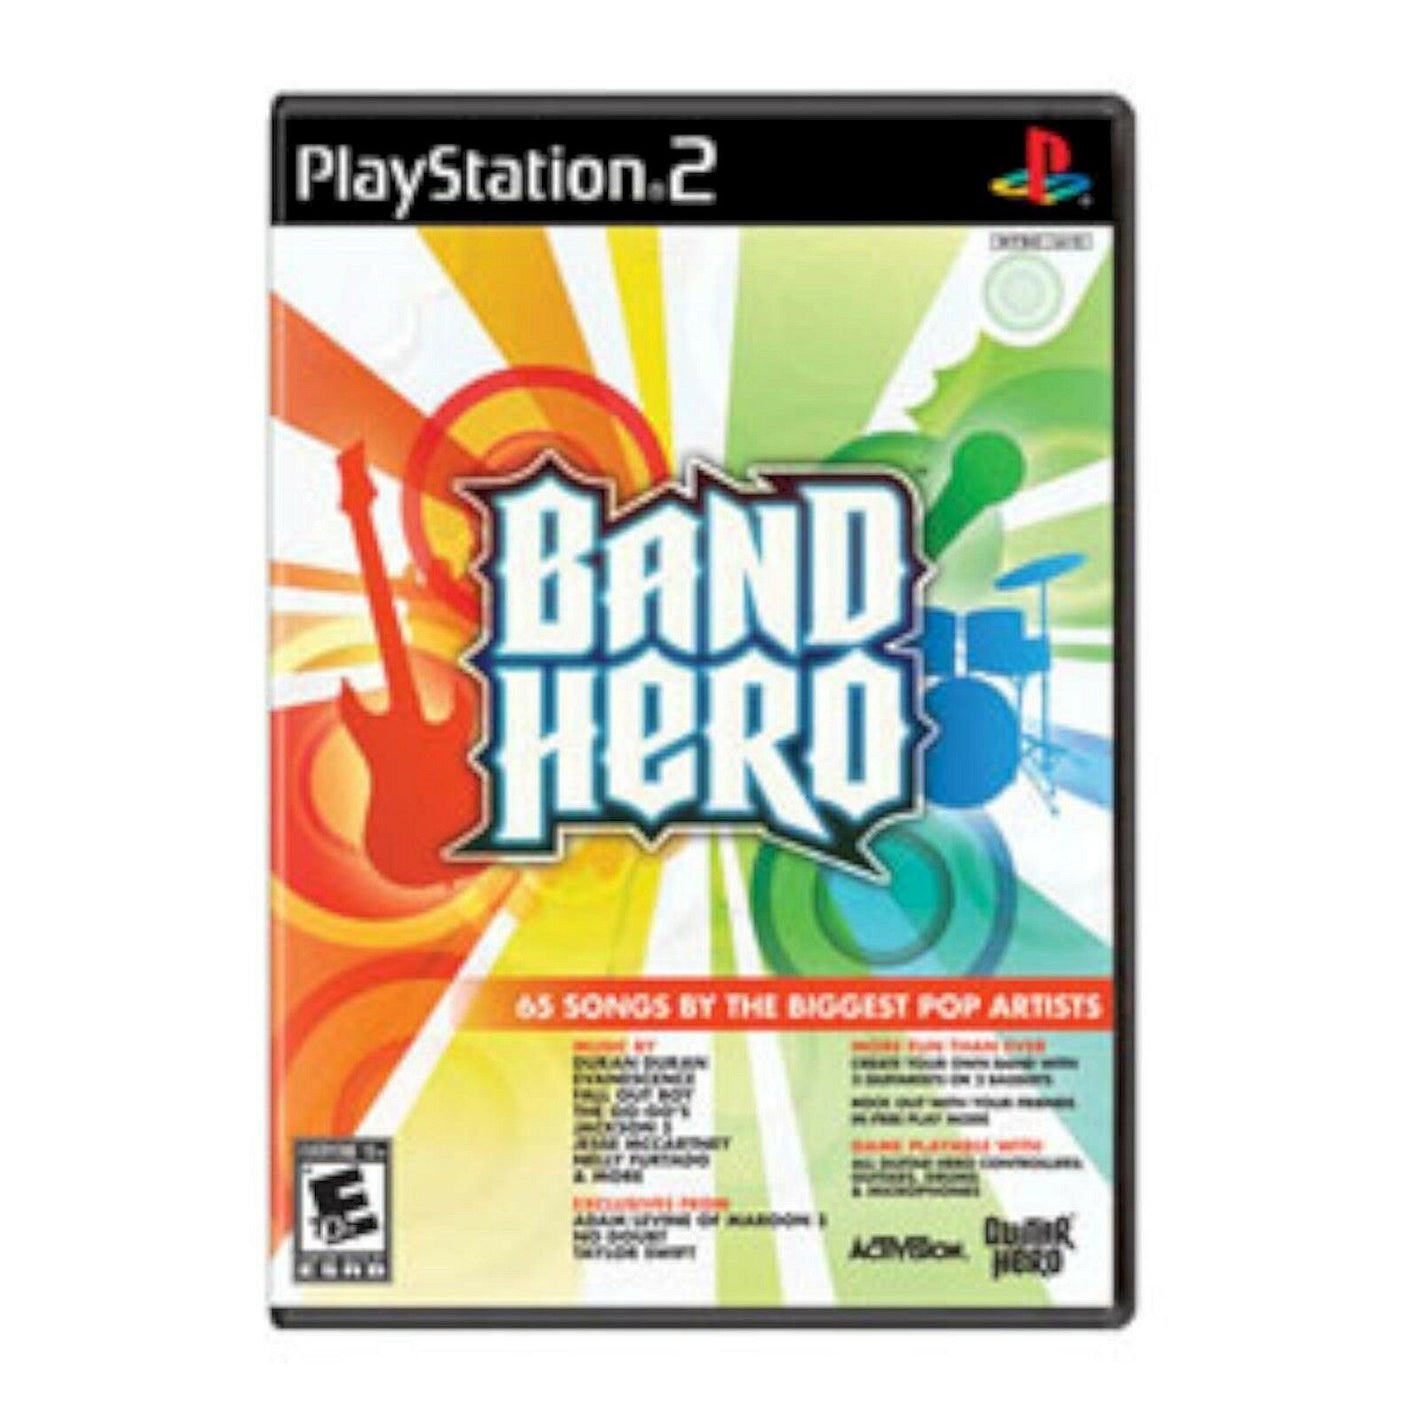 Band Hero PS2 Video Game E music rock guitar gaming music Sony PlayStation-2 -B- [Used/Refurbished]